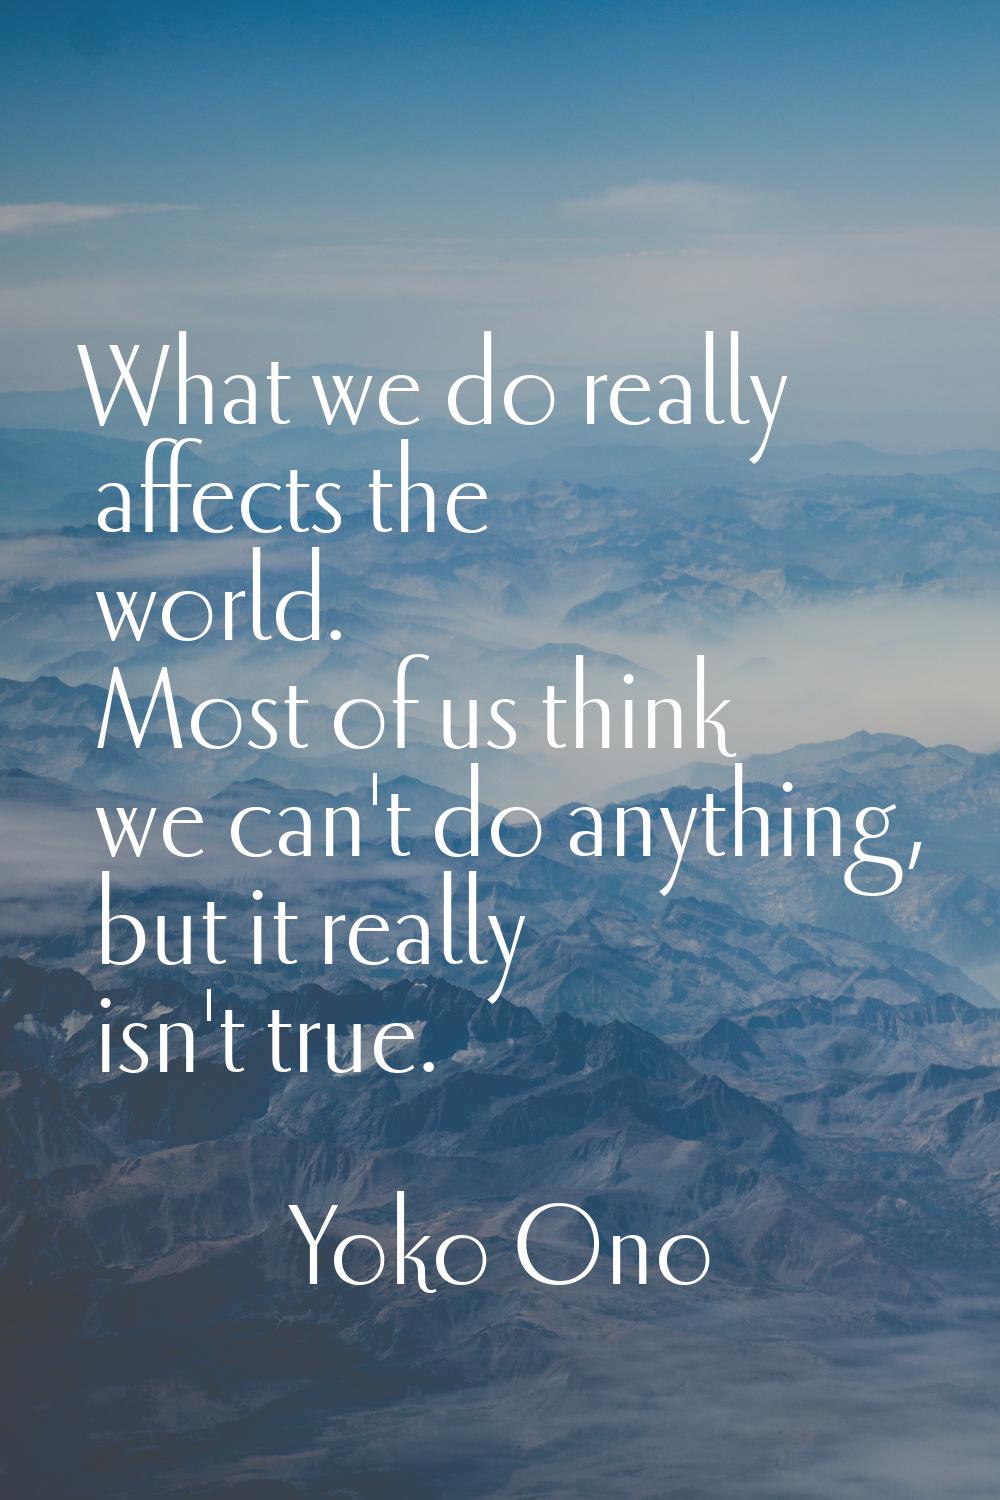 What we do really affects the world. Most of us think we can't do anything, but it really isn't tru